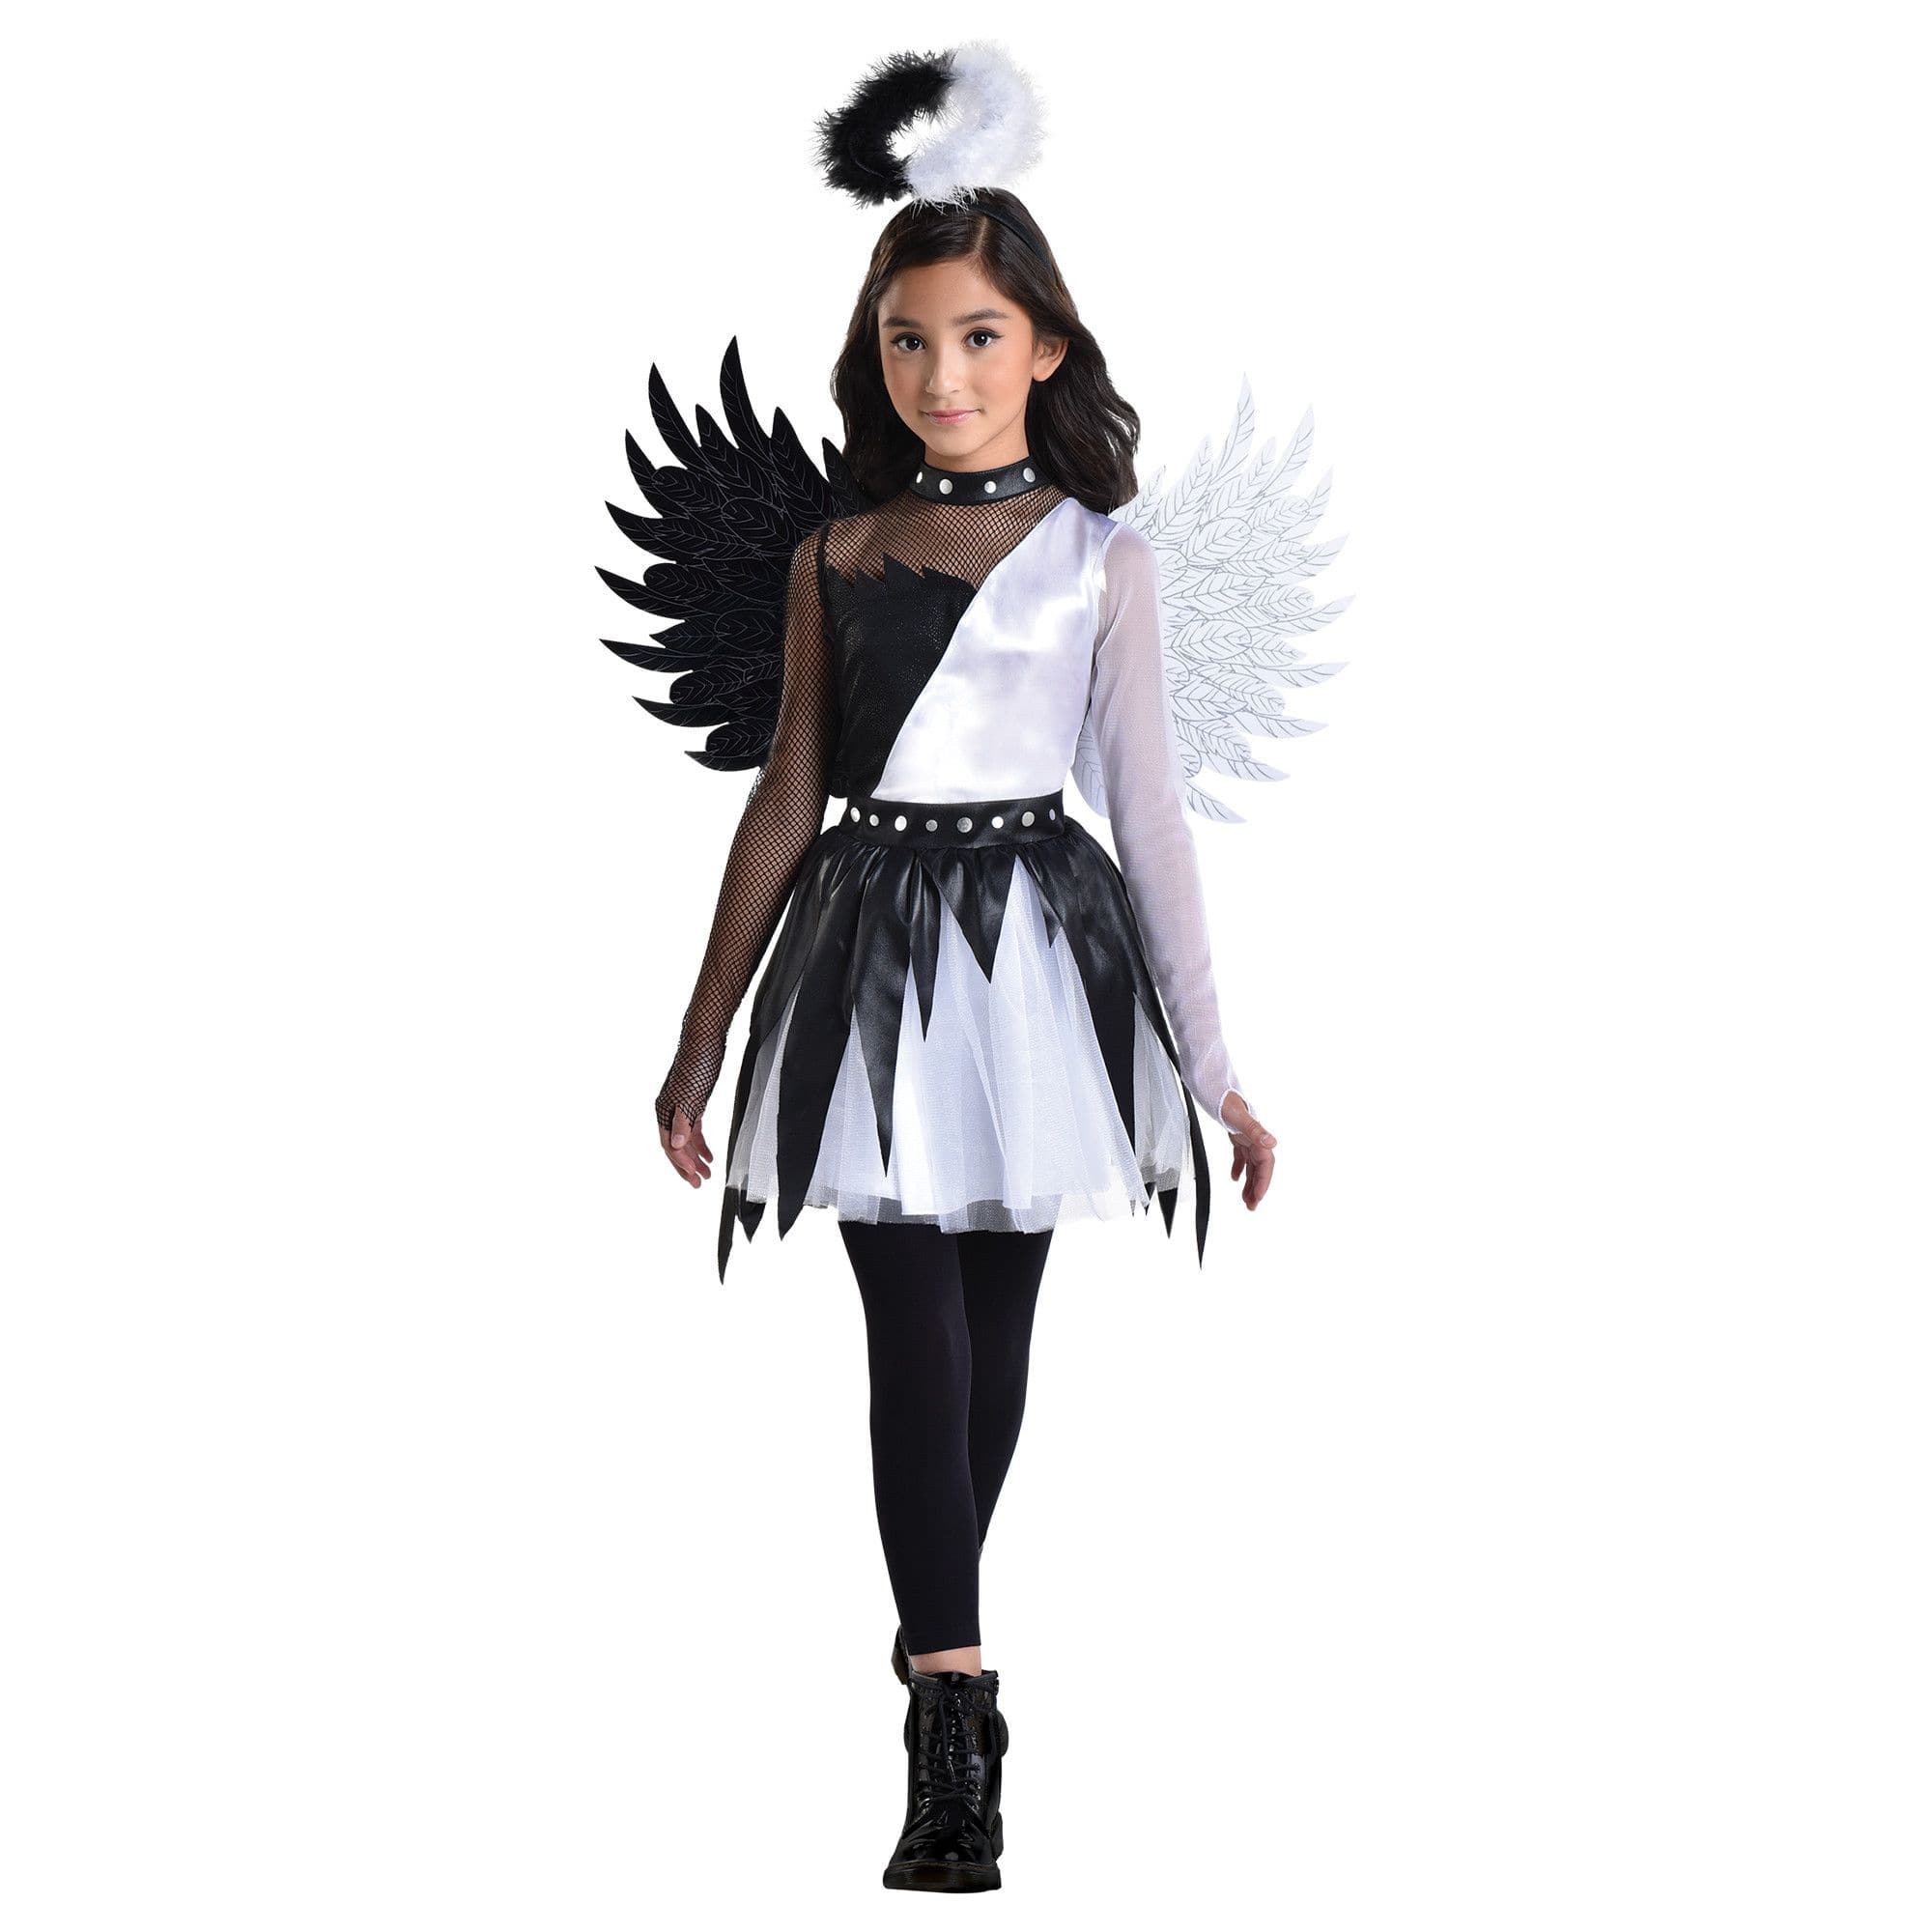 Kids' Punky Jester Black/White Outfit with Shirt/Skirt/Leggings